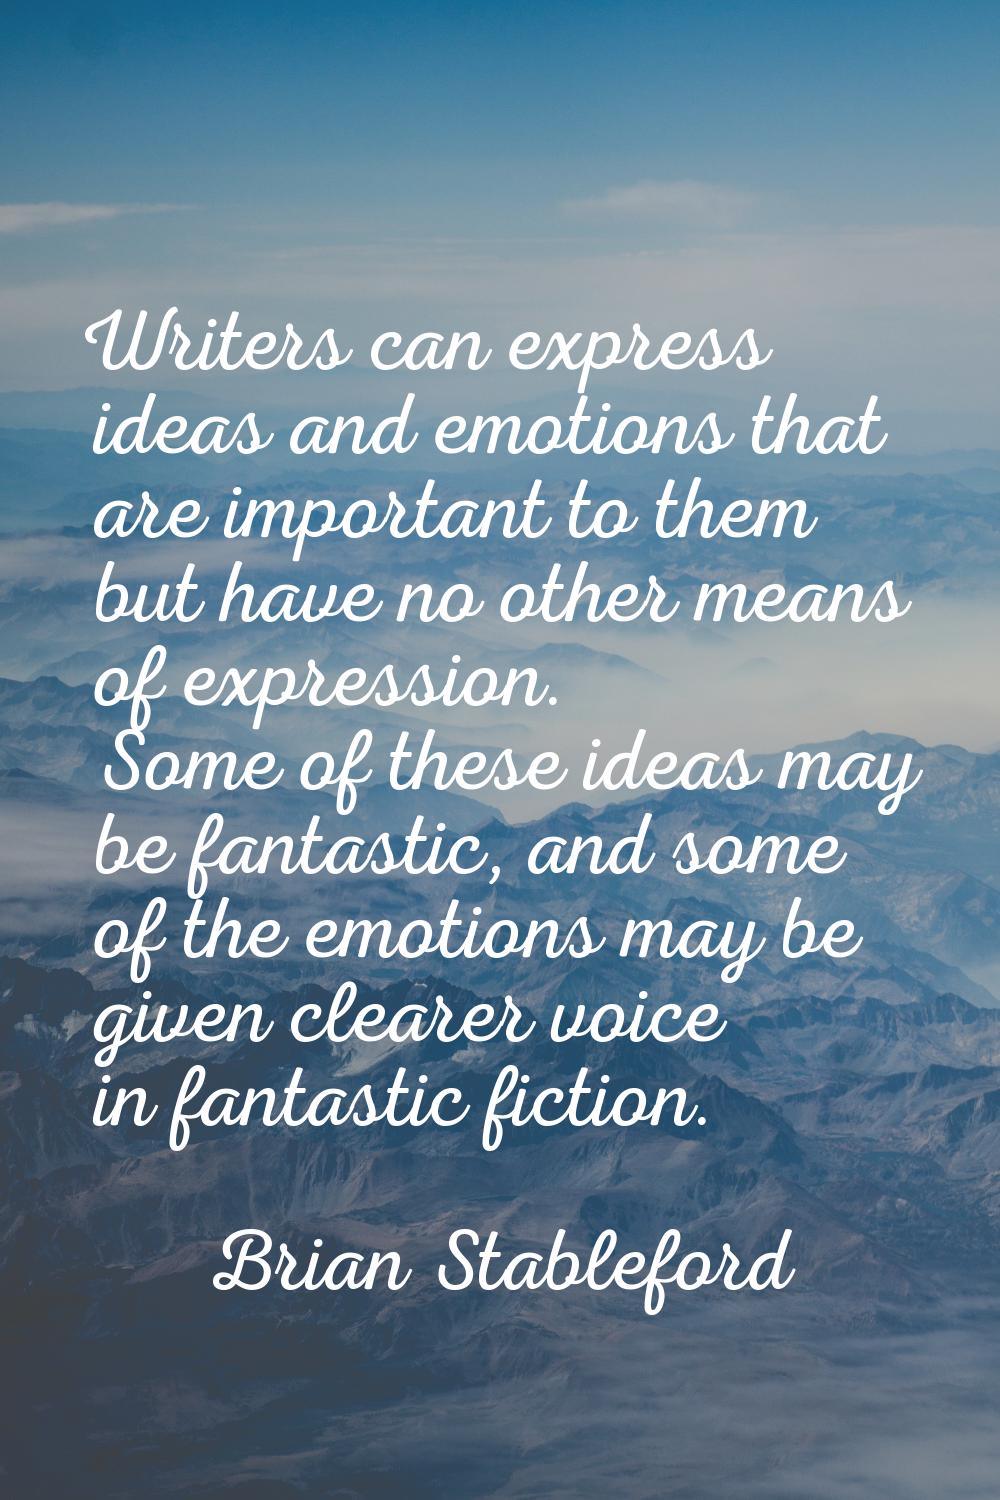 Writers can express ideas and emotions that are important to them but have no other means of expres